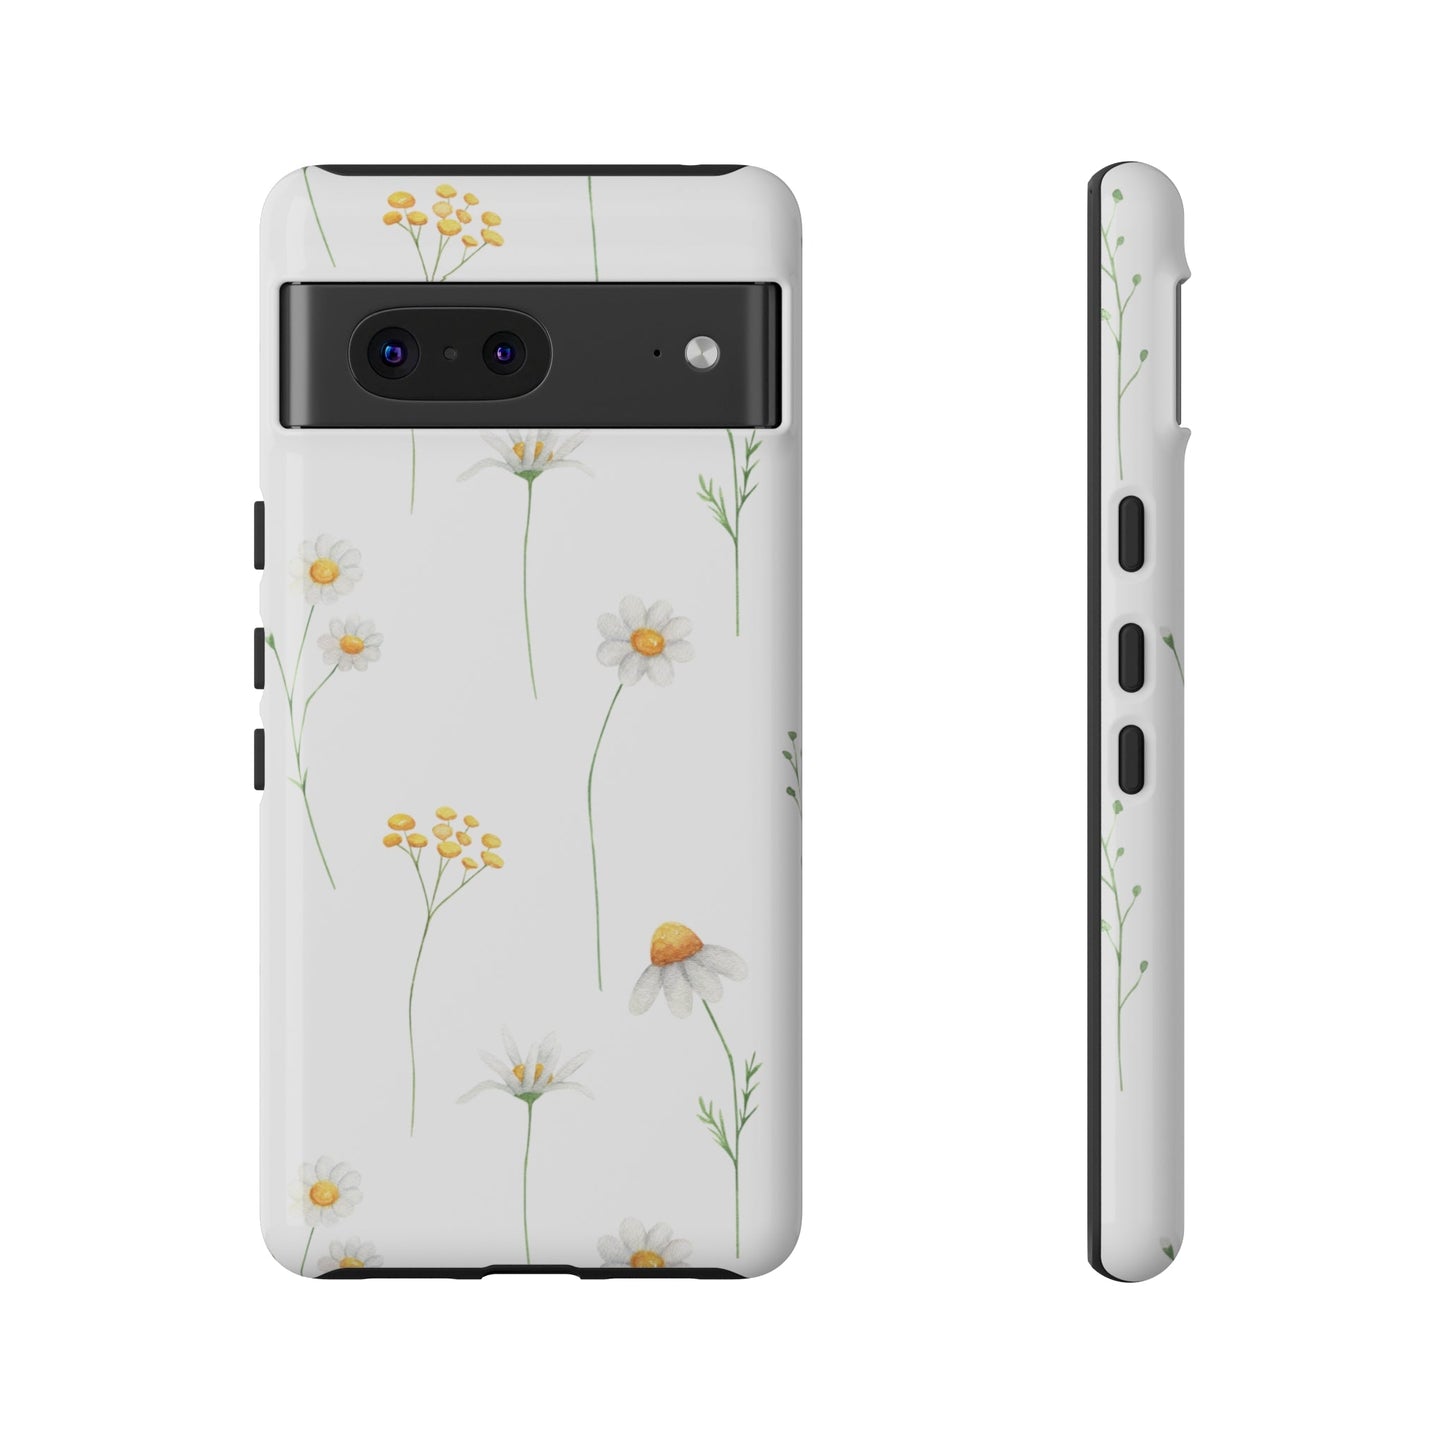 Phone case fits iPhone Samsung Galaxy Google Pixel - Daisy Floral - Cheerful Lane